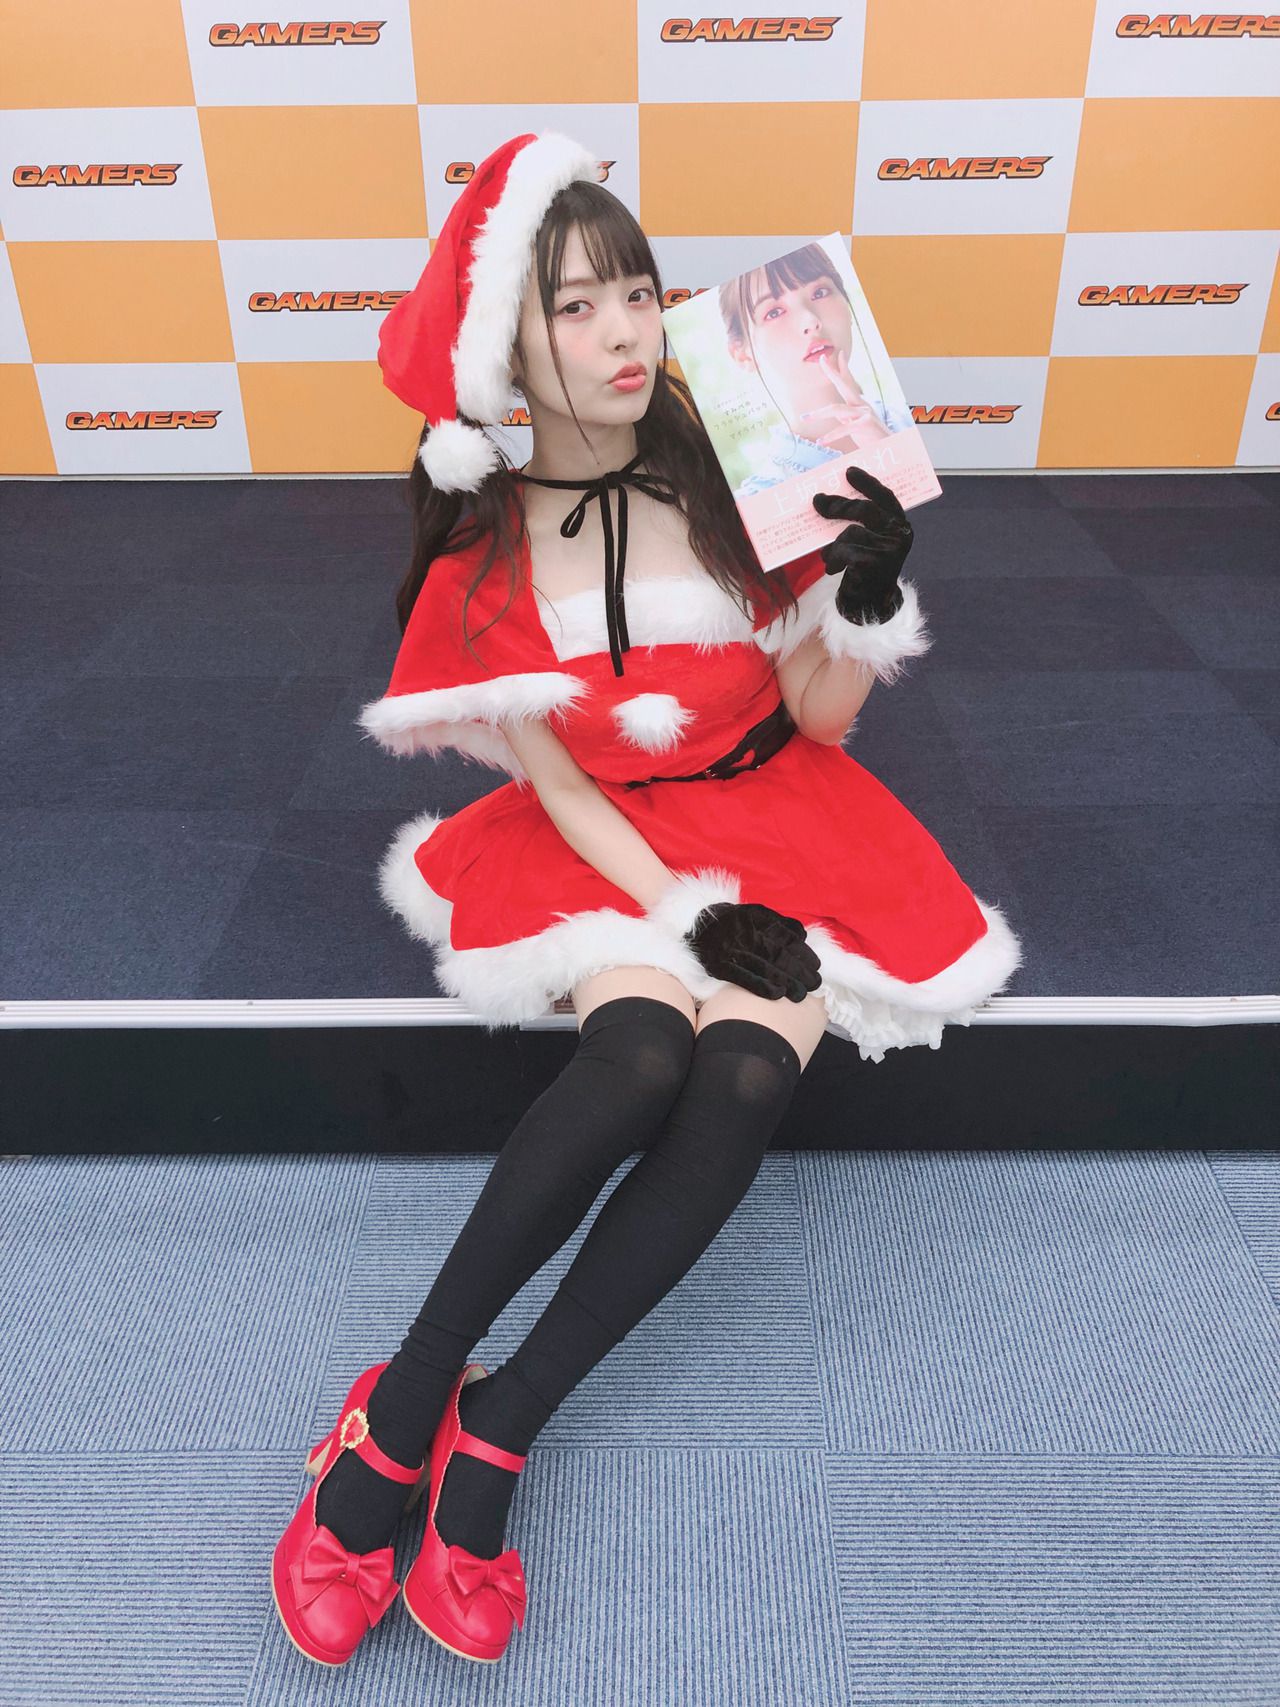 Sumire Uesaka "to emphasize the thigh... W] also erotic image offer Wwwwwww 10